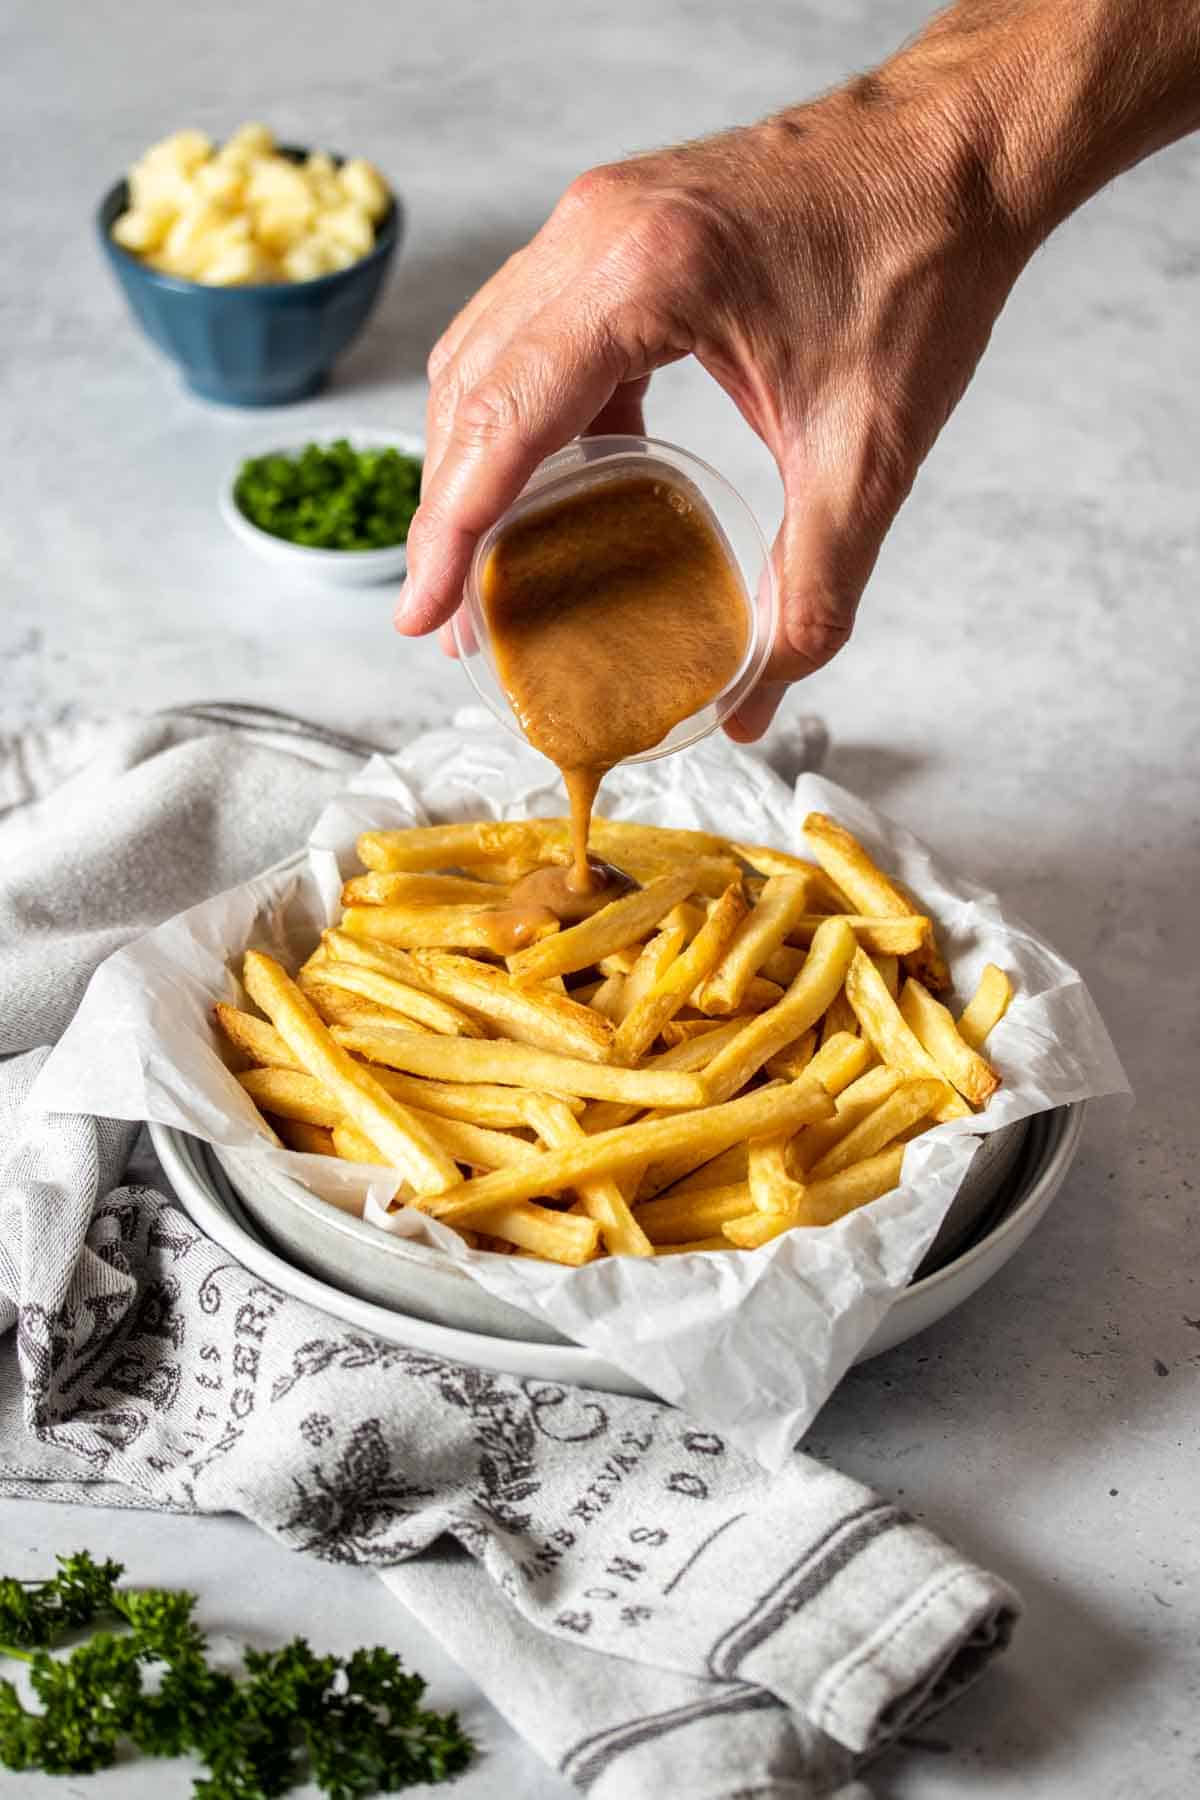 A hand pouring gravy from a plastic container onto a bowl of fries.